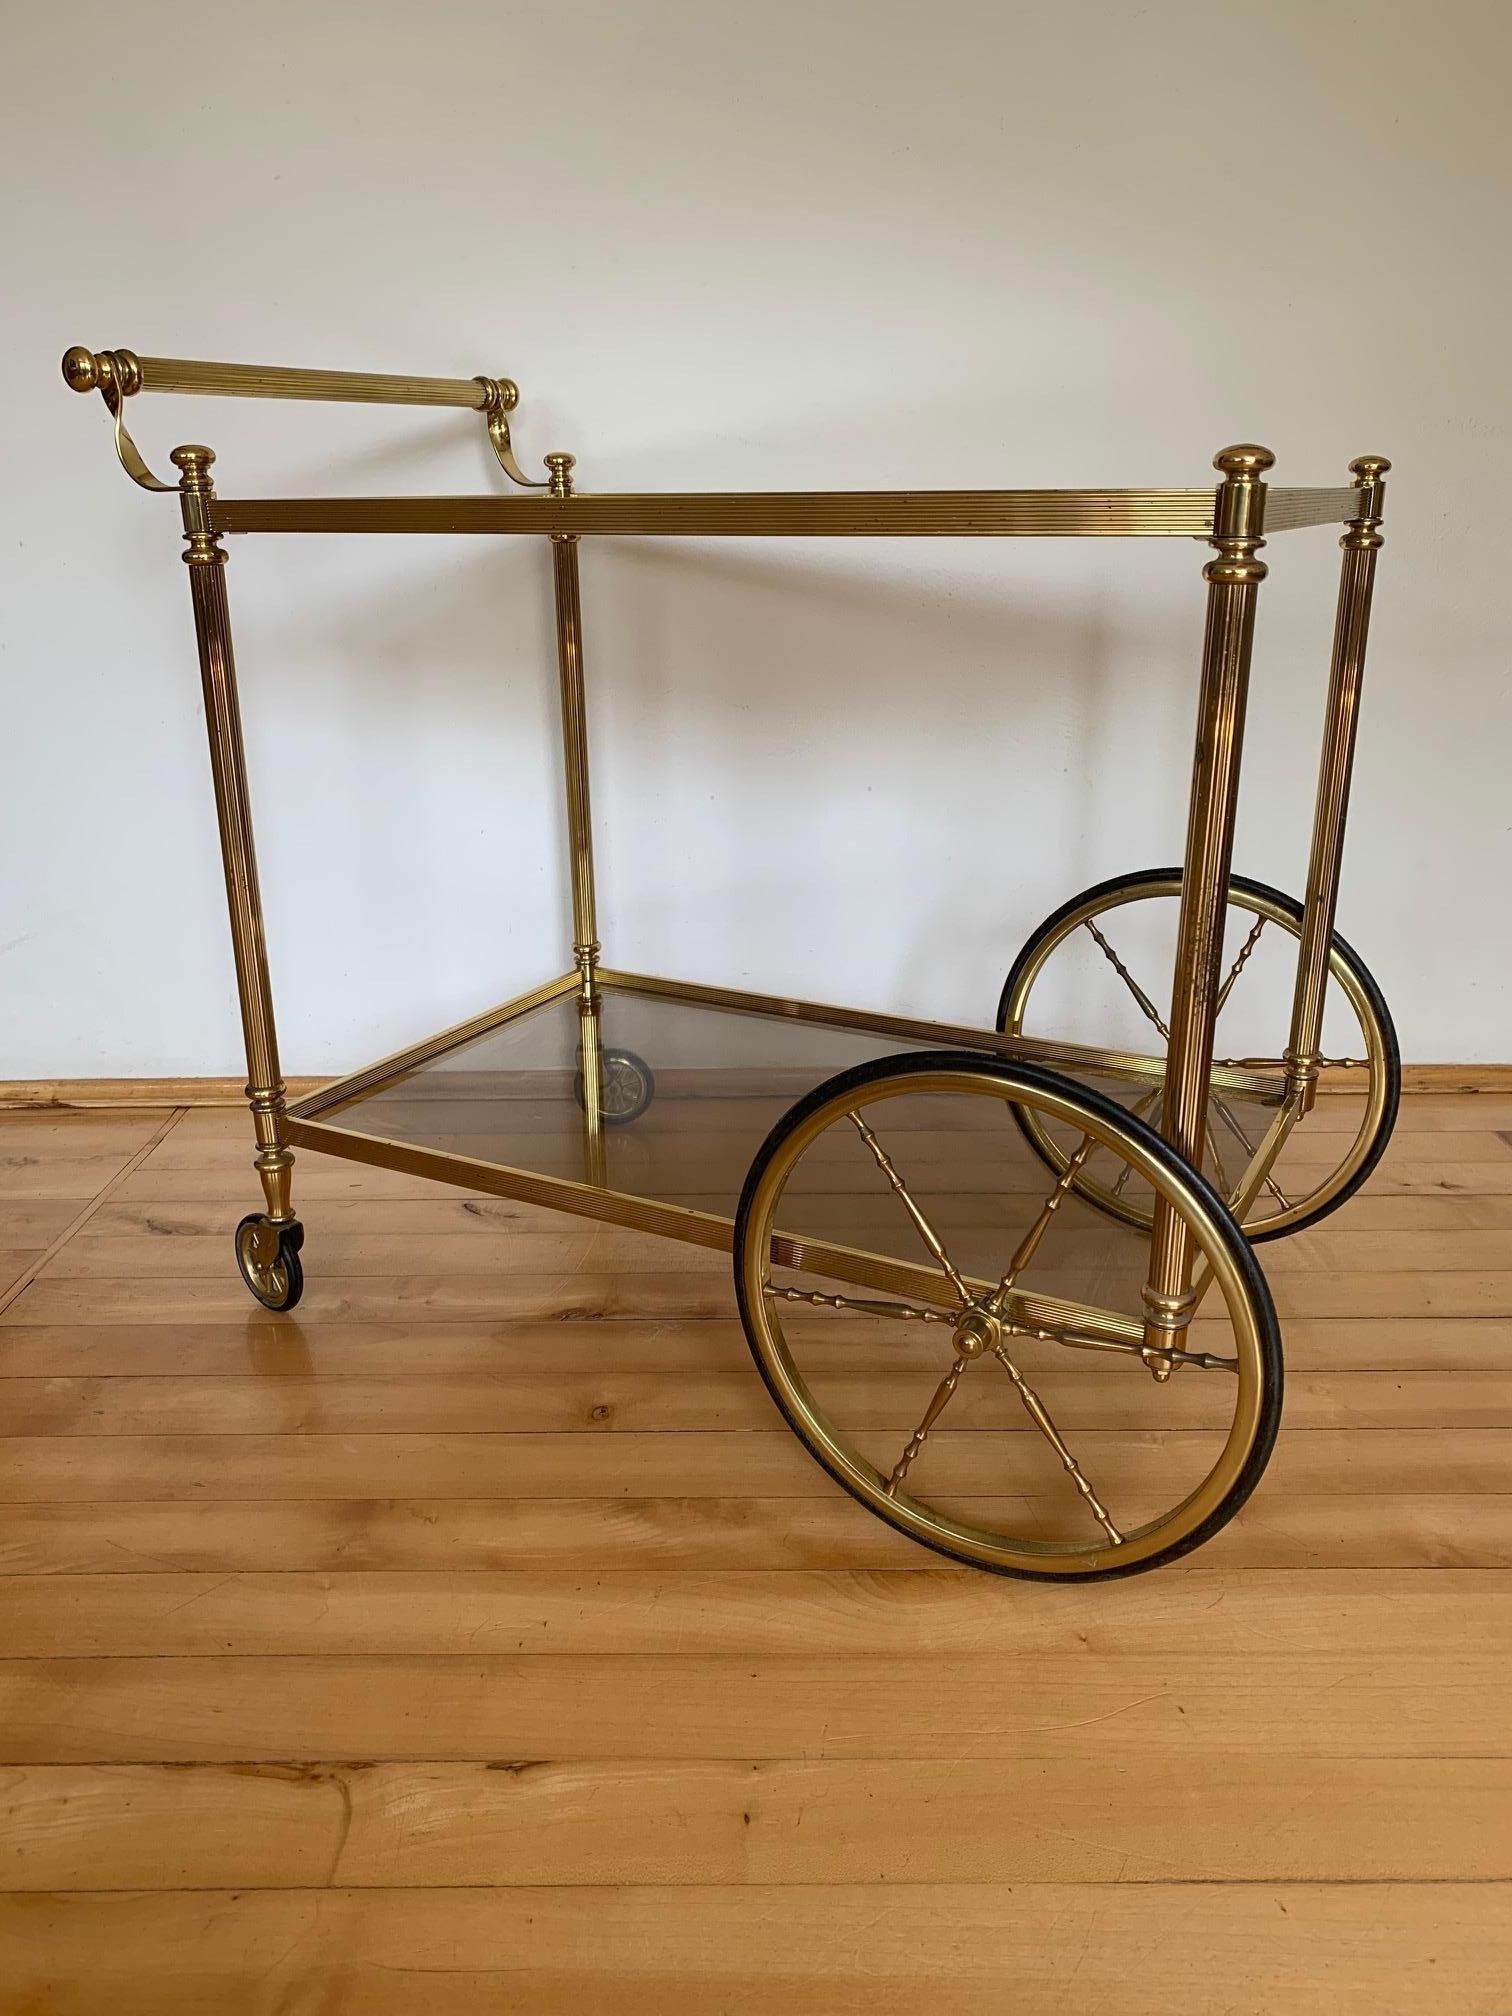 French, bronze bar trolley from the 1960s fully original. Very attractive, functional form.